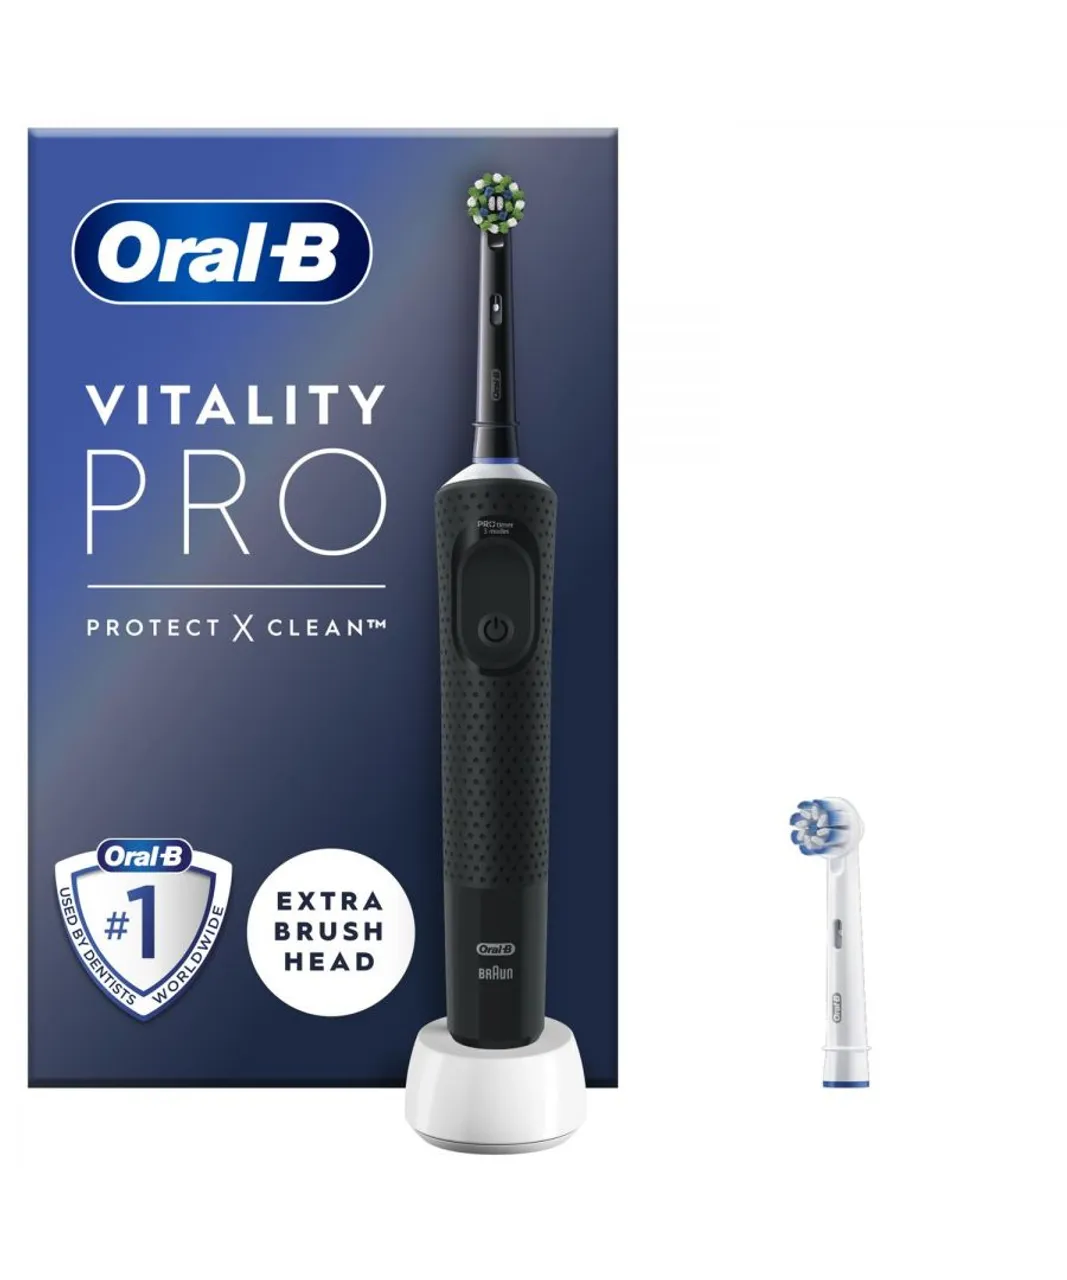 Oral B Unisex Oral-B Vitality Pro Electric Rechargeable Toothbrush with 2 Brush Heads, Black - One Size